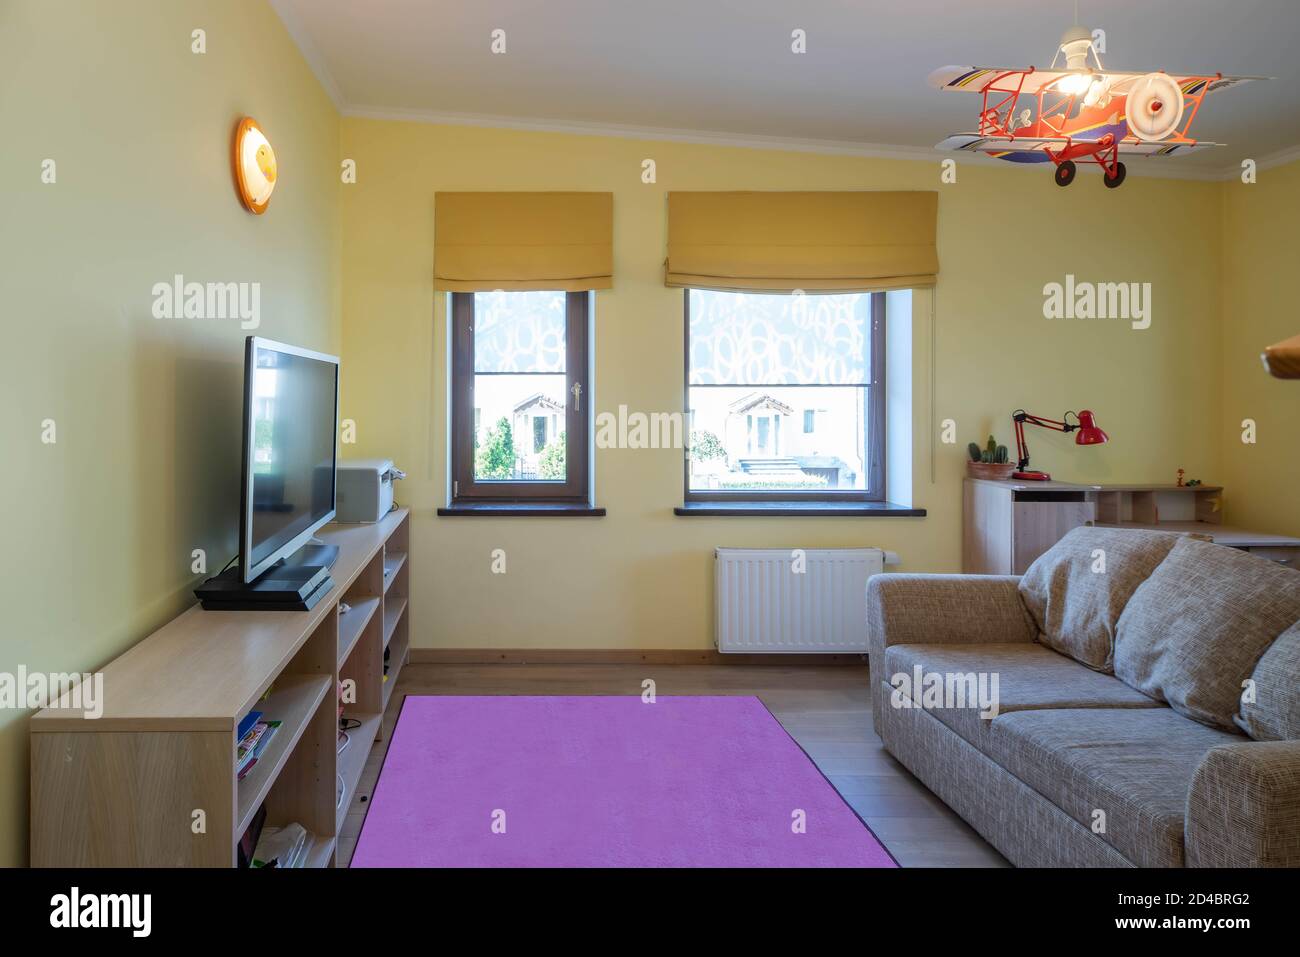 Modern interior of children`s room in luxury apartment. Cozy couch. TV on wooden shelf. Yellow walls. Stock Photo